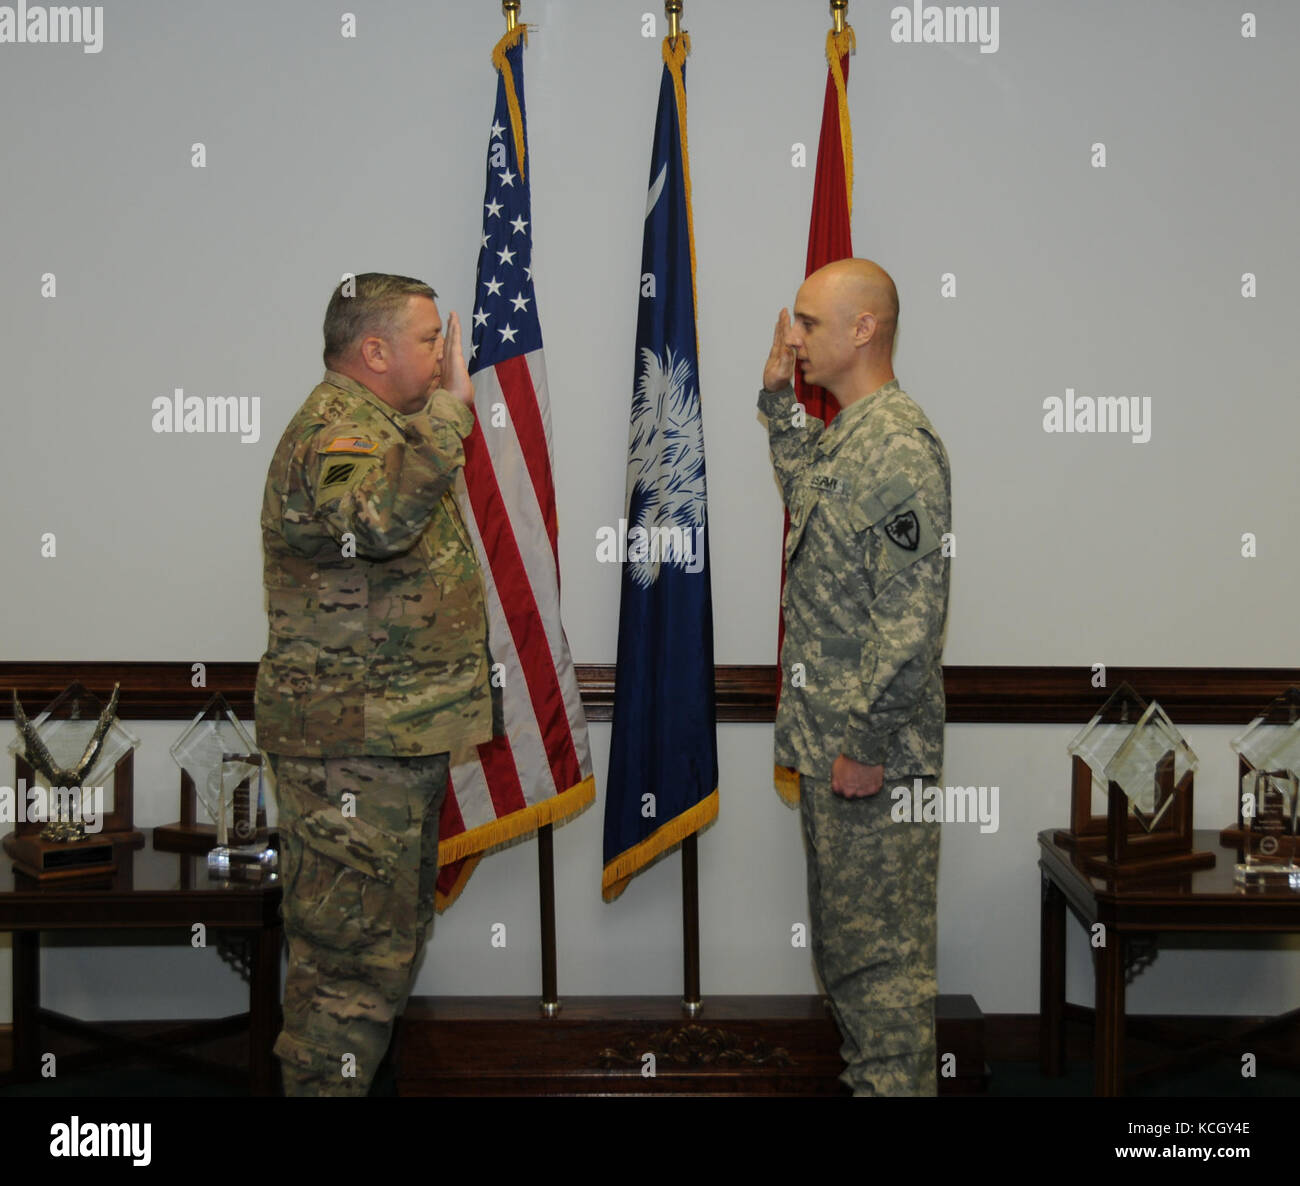 Two South Carolina Army National Guard Soldiers are commissioned as second lieutenants joining three more South Carolina Army National Guard officers in being recognized as the newest members of the Chaplain Corps. at the Adjutant General’s building in Columbia, South Carolina on September 22, 2017. (U.S. Army National Guard photo by 1st Lt. Cody I. Denson) Stock Photo